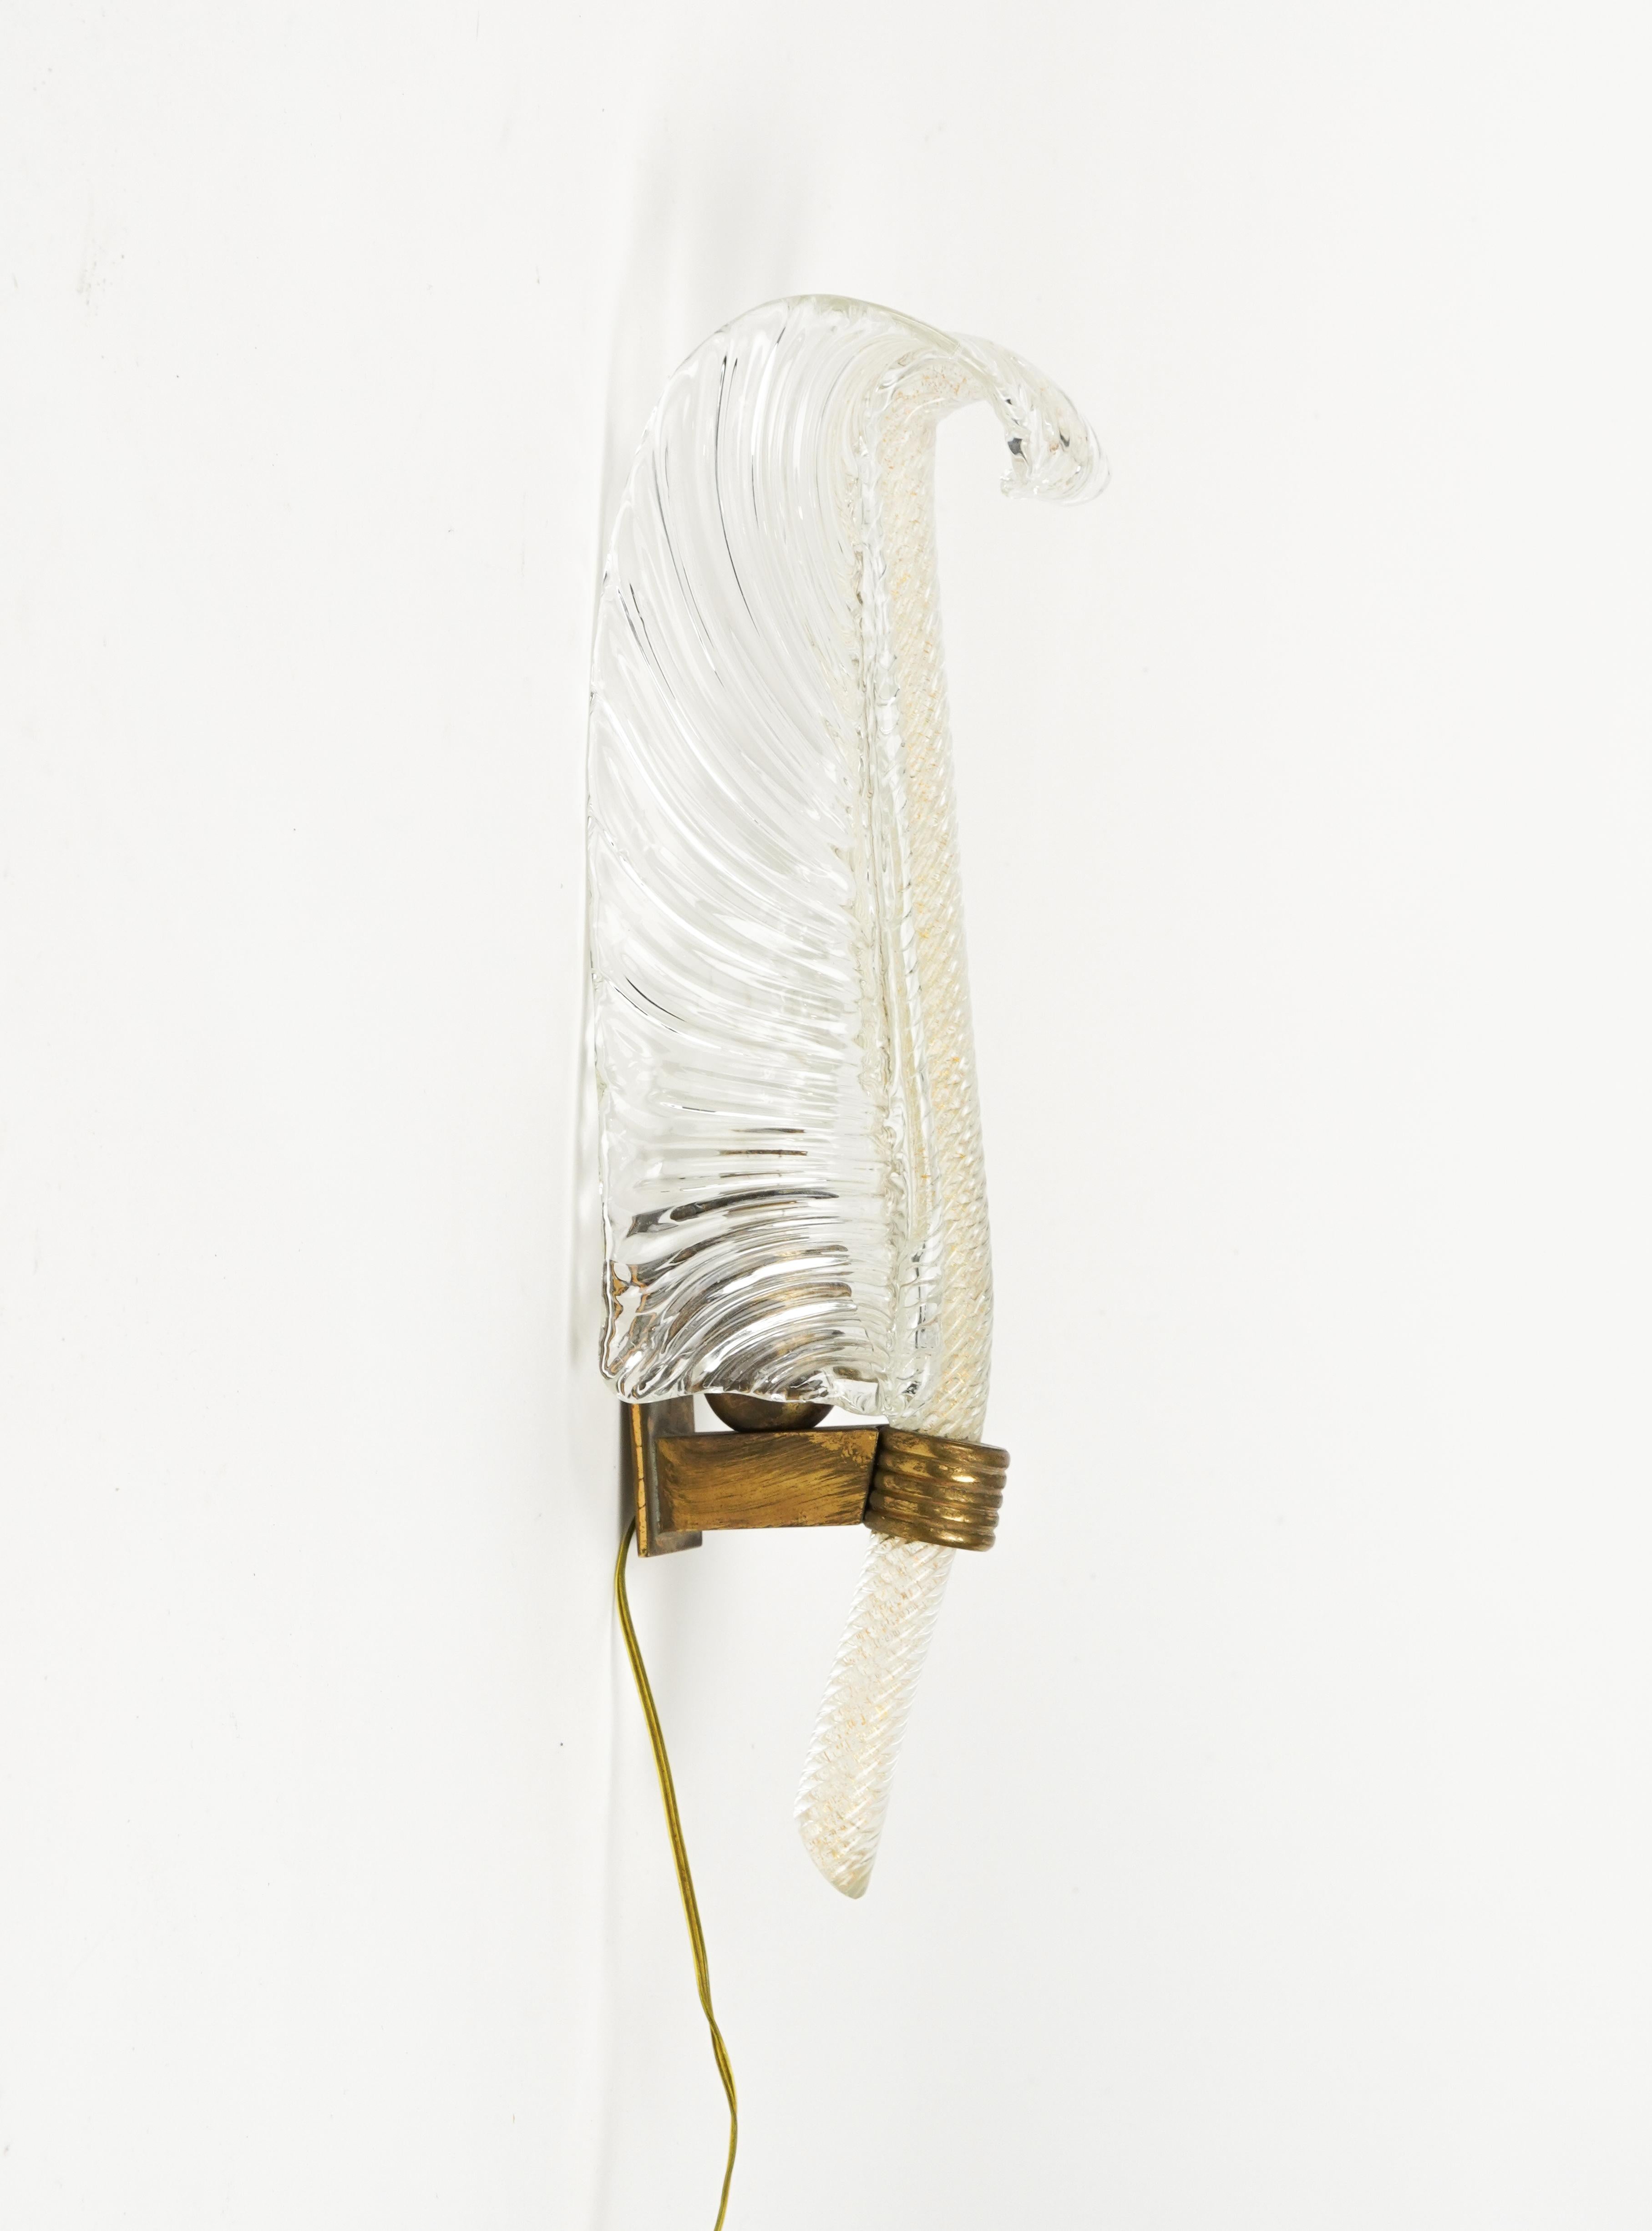 Mid-Century Modern Wall Lamp Sconce in Murano Glass and Brass by Barovier & Toso, Italy 1940s For Sale